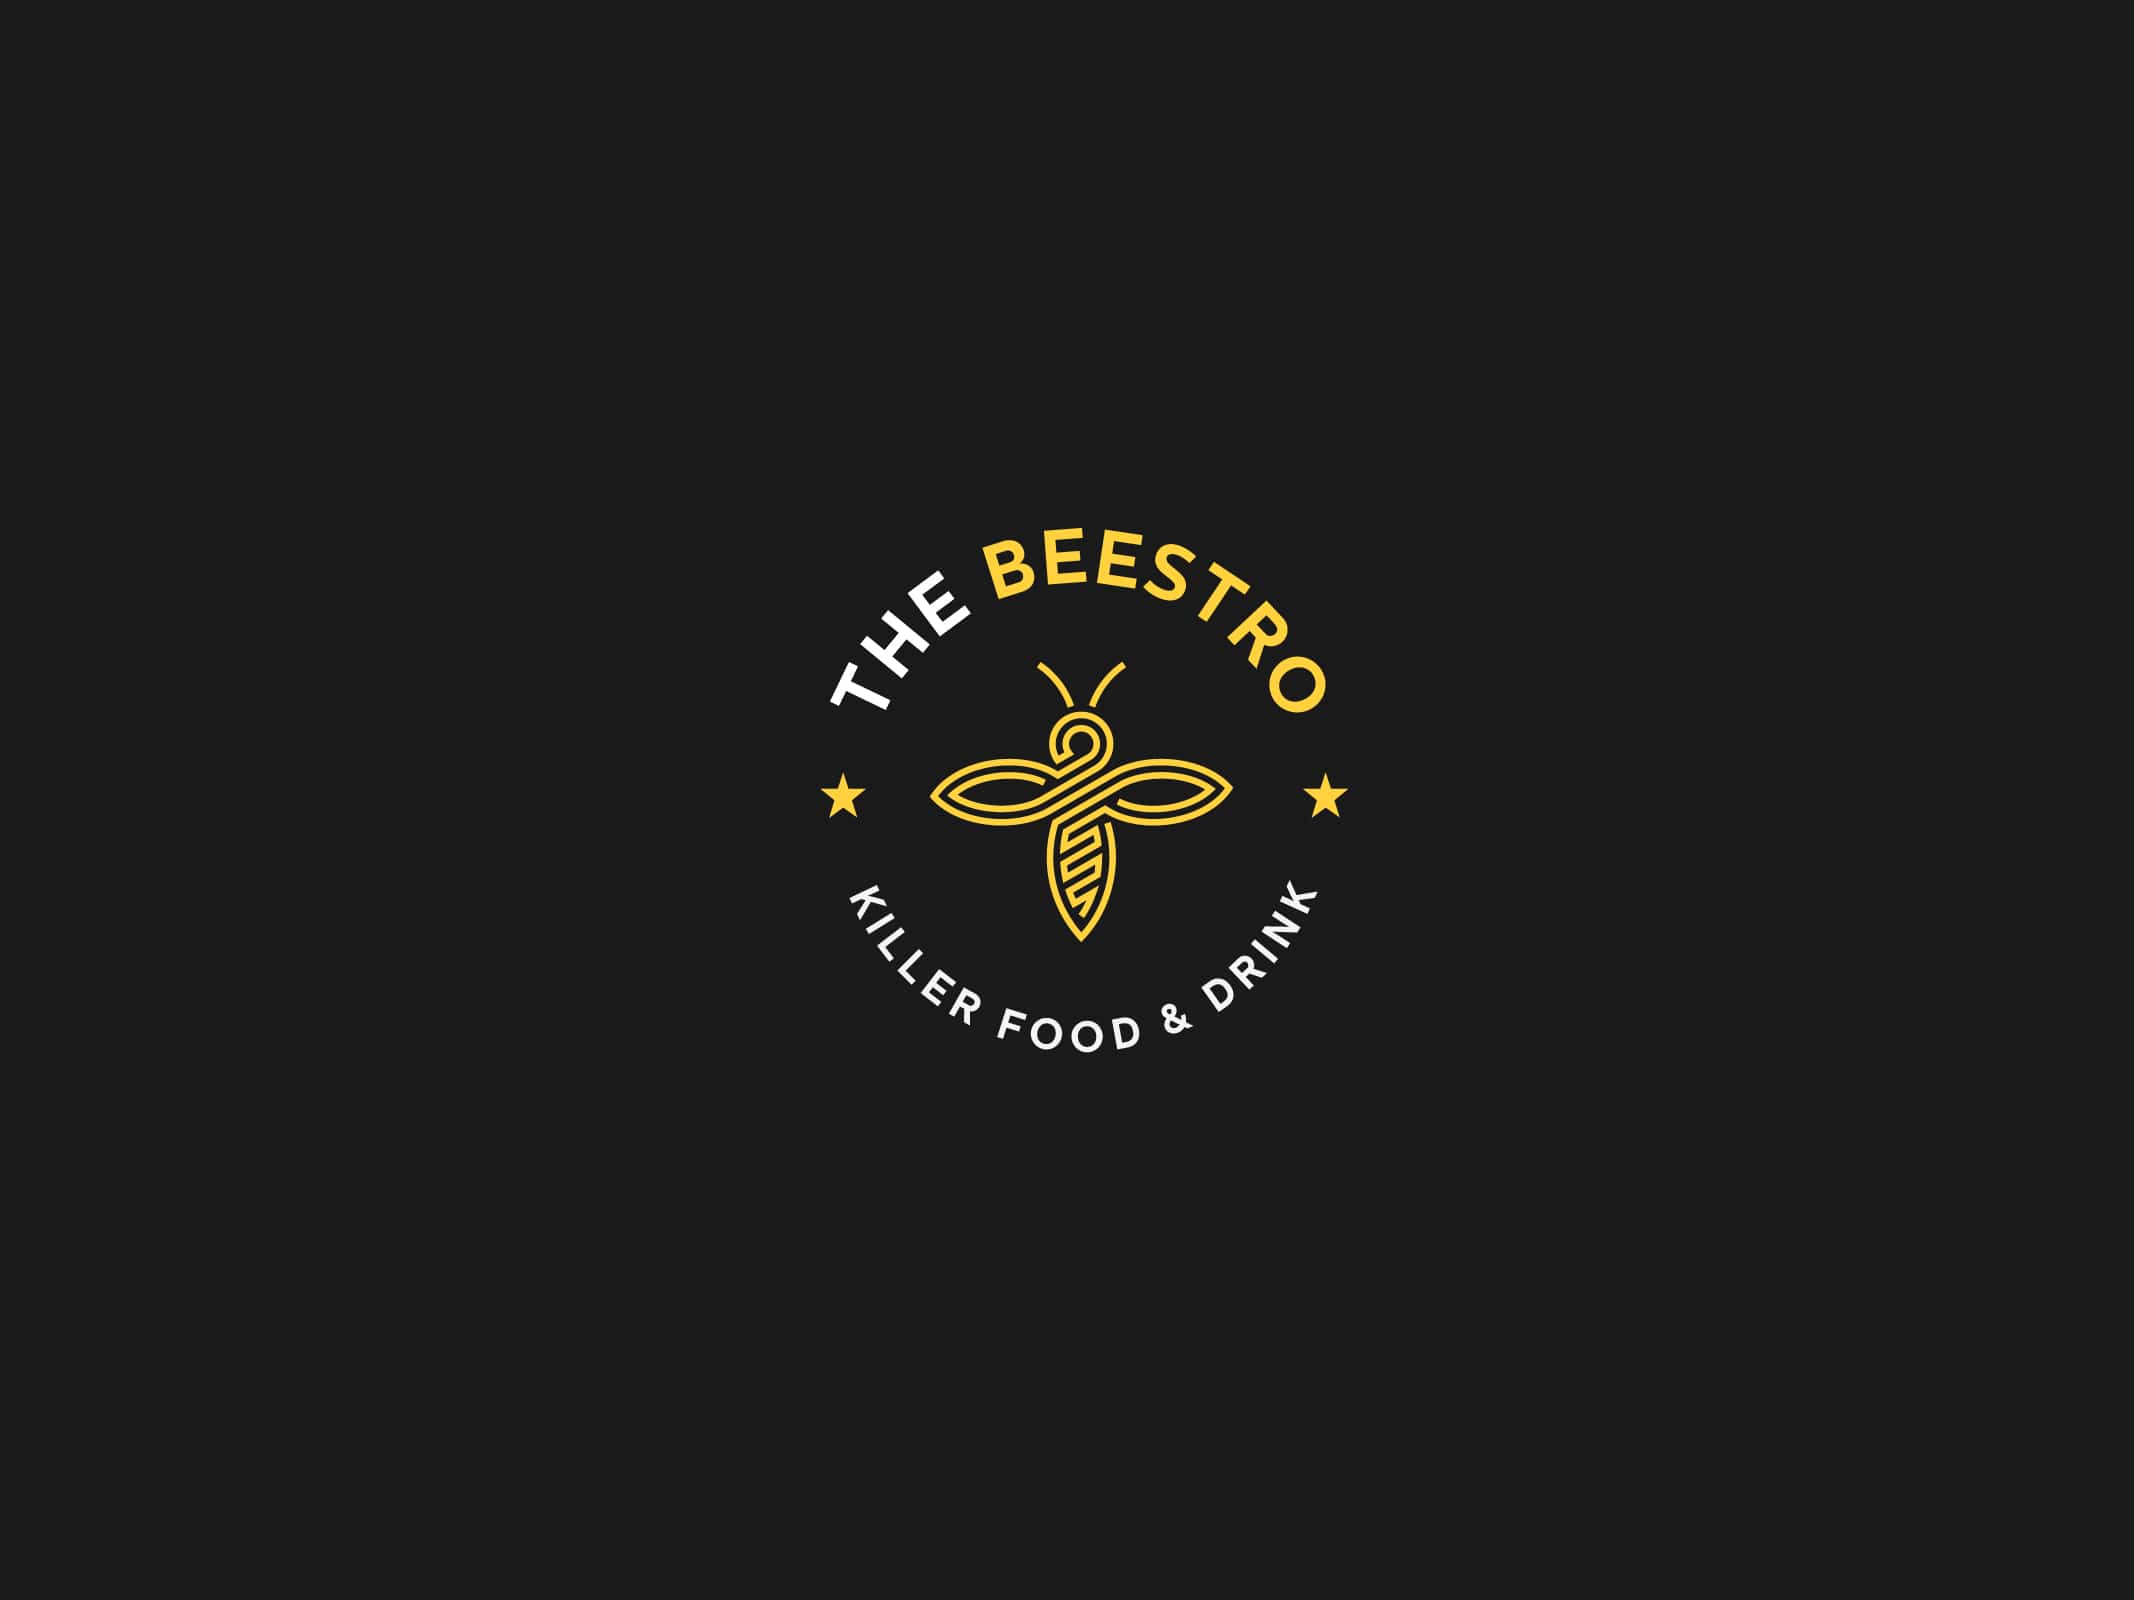 The Beestro Logo Final Black and White 01